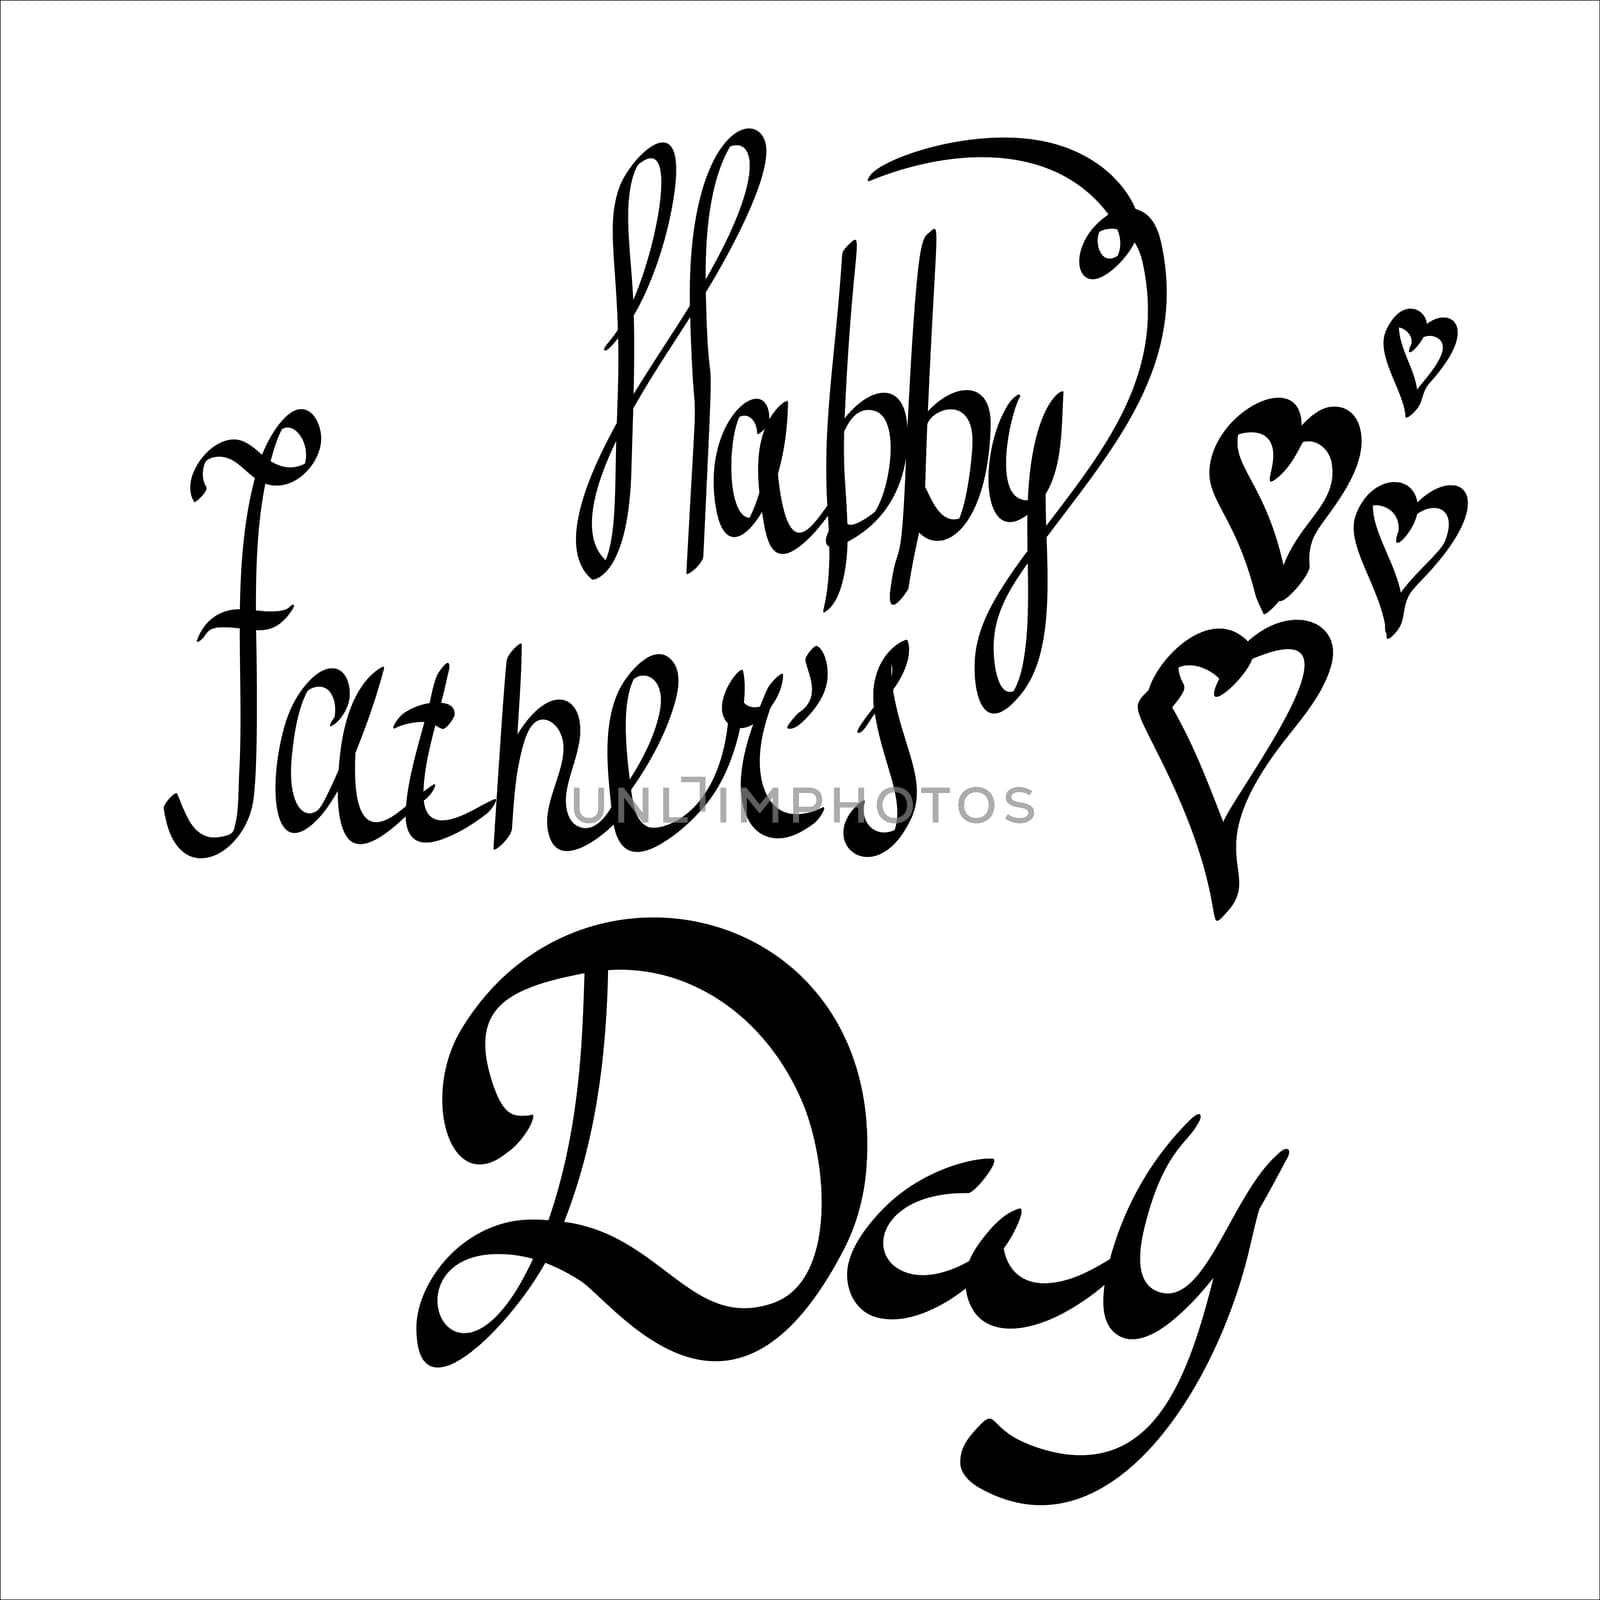 Happy Fathers Day with Hearts. hand-written lettering, t-shirt print design, typographic composition isolated on white background